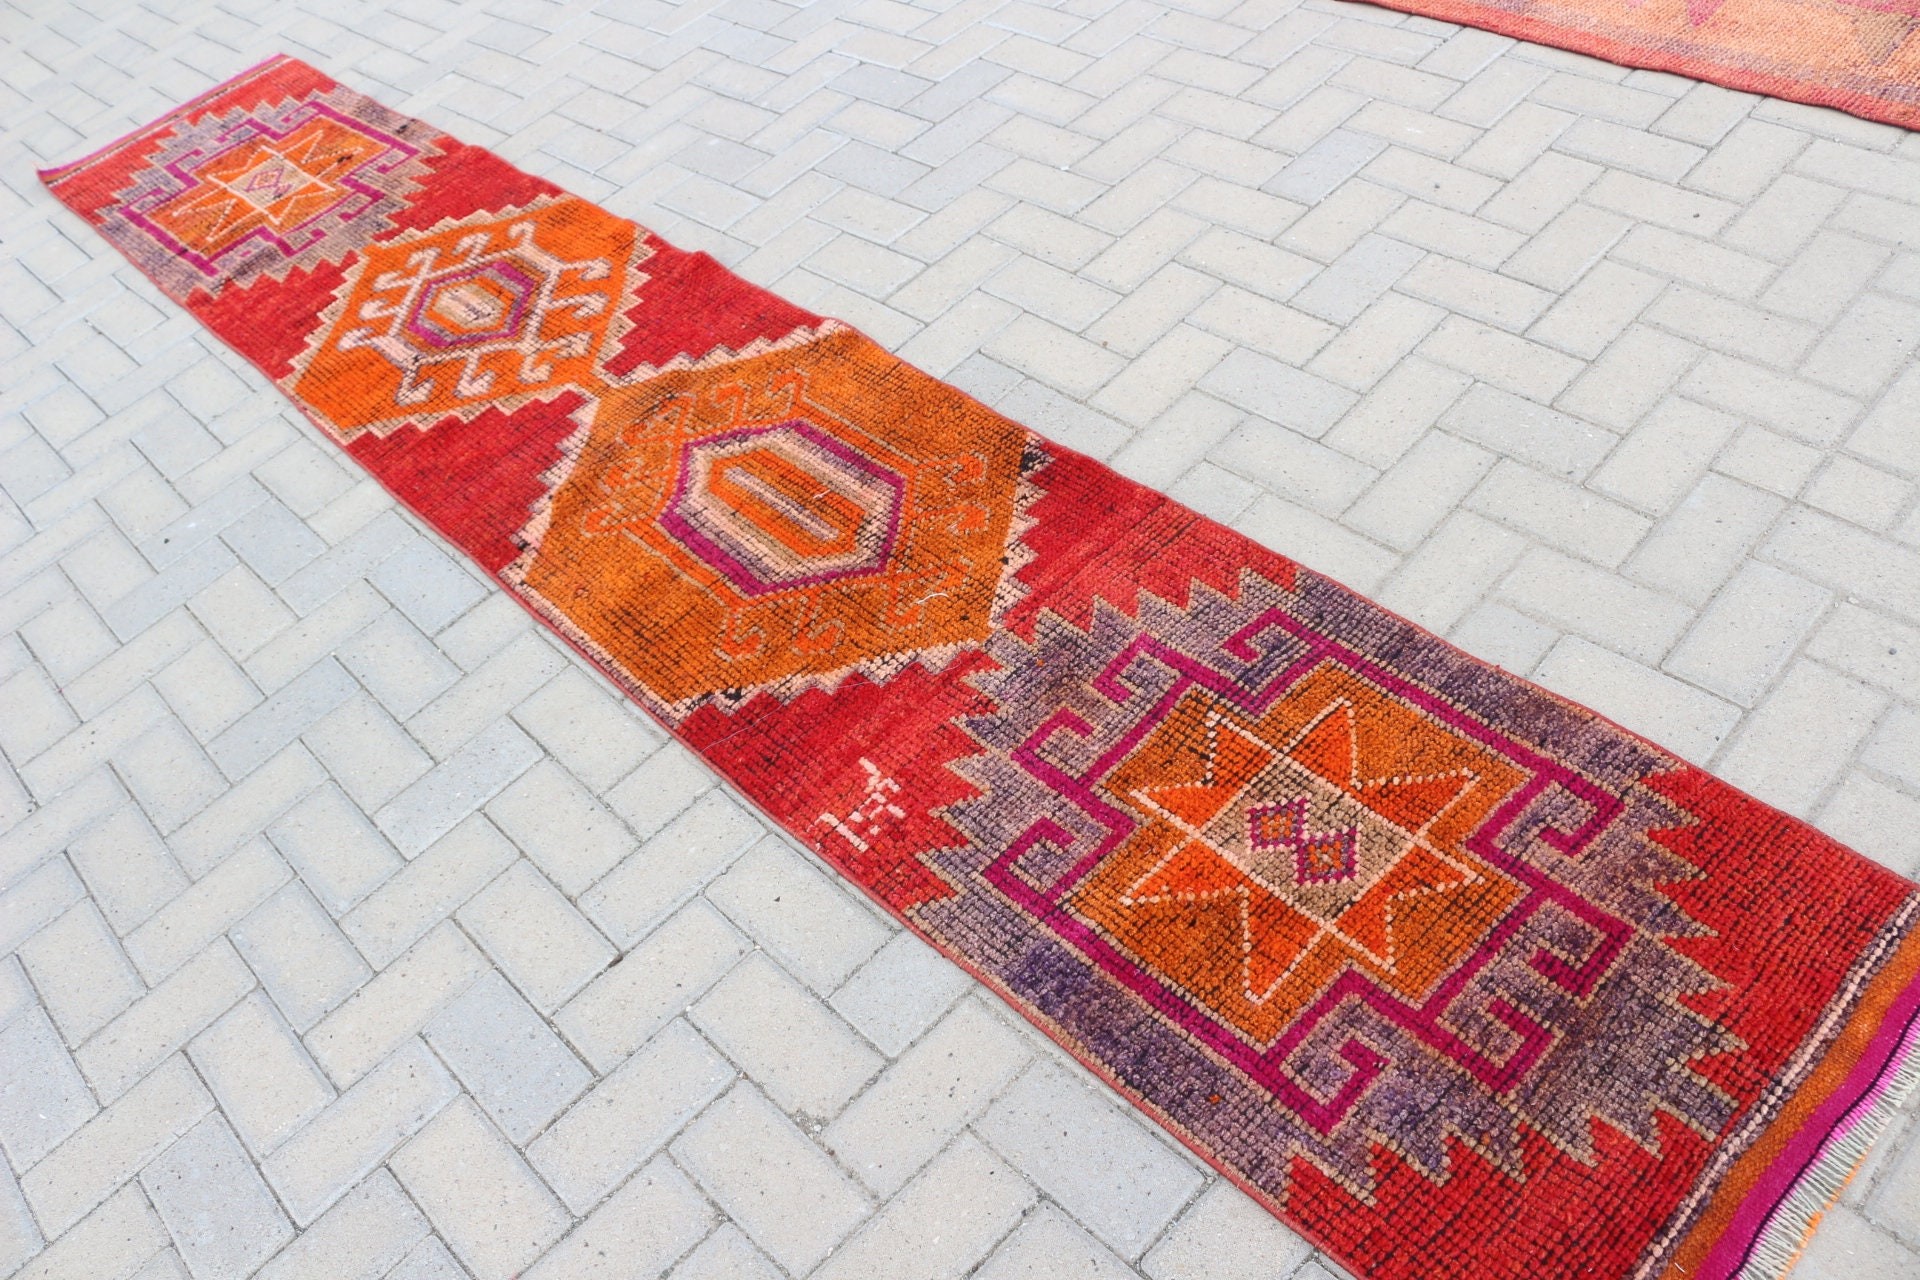 Hallway Rug, Stair Rugs, Vintage Rugs, Kitchen Rug, Red  2x12.1 ft Runner Rug, Rugs for Kitchen, Turkish Rug, Oushak Rugs